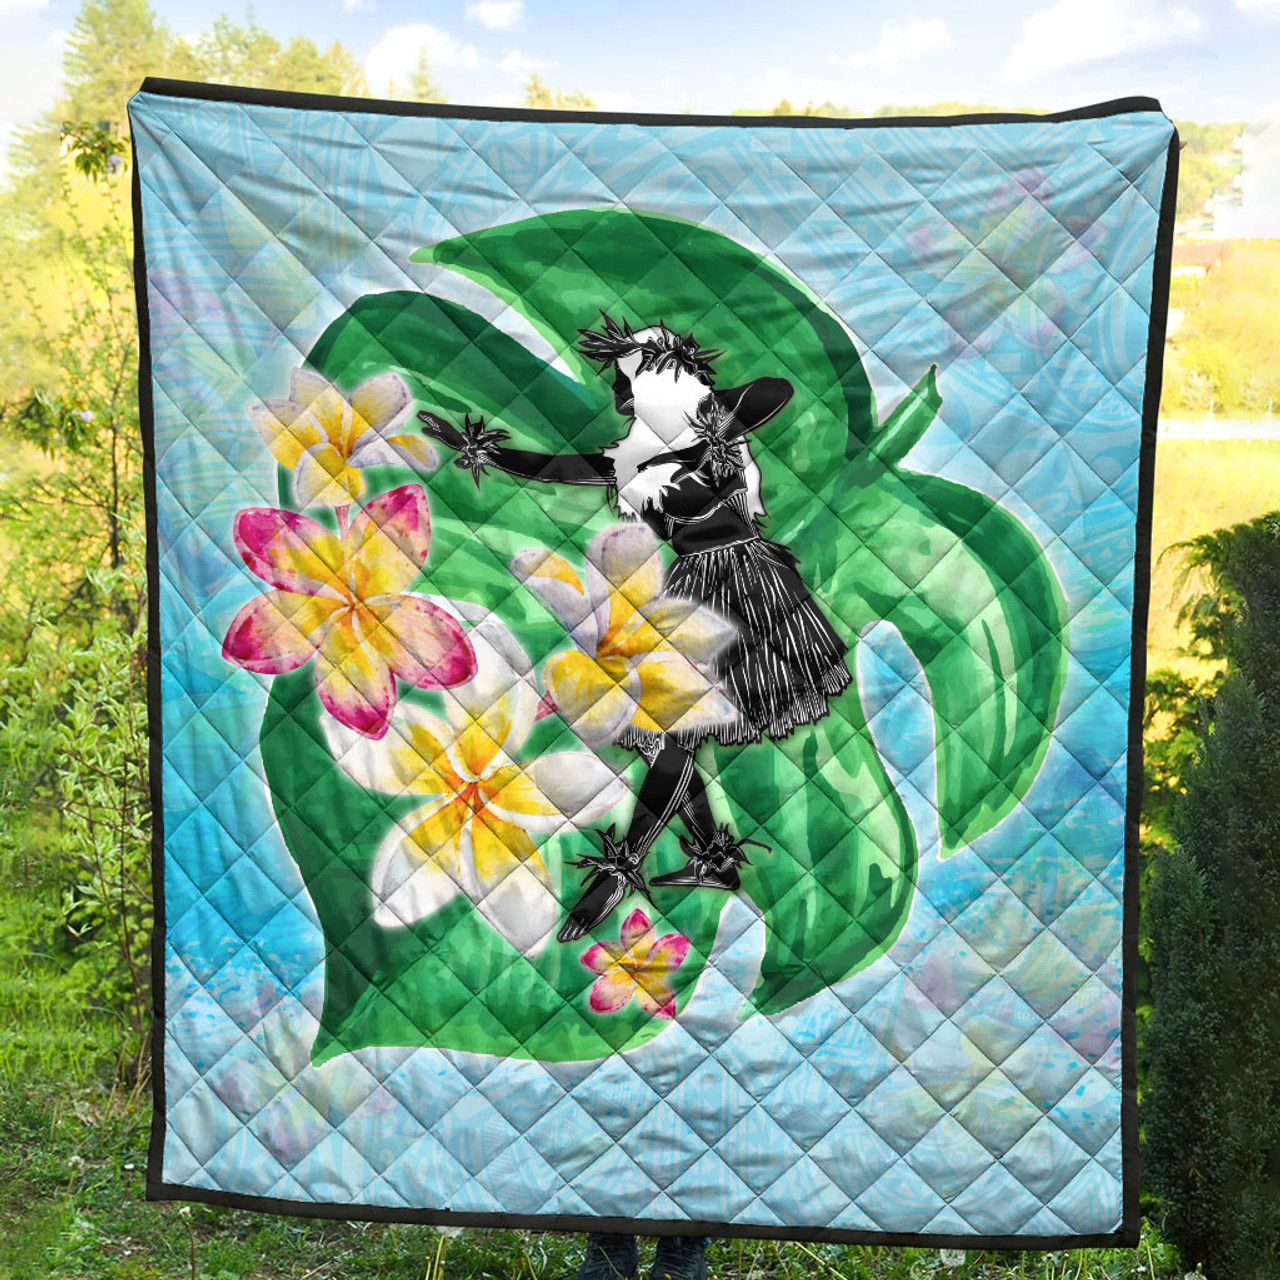 Hawaii Premium Quilt Hula Girls With Tropical Flowers Polynesian Style